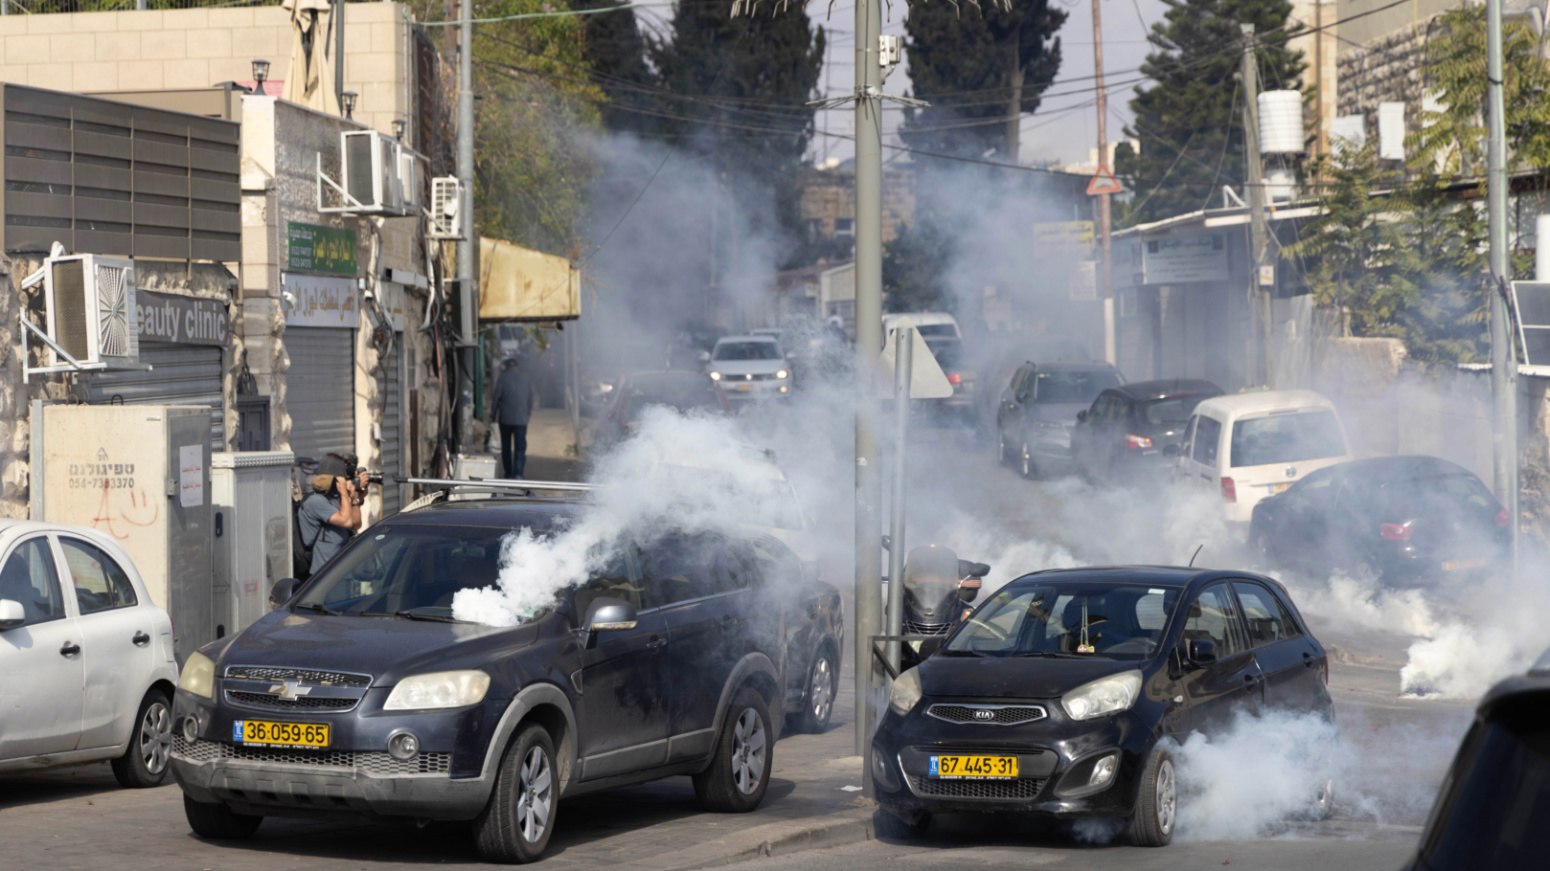 Cars surrounded by tear gas in Jerusalem.